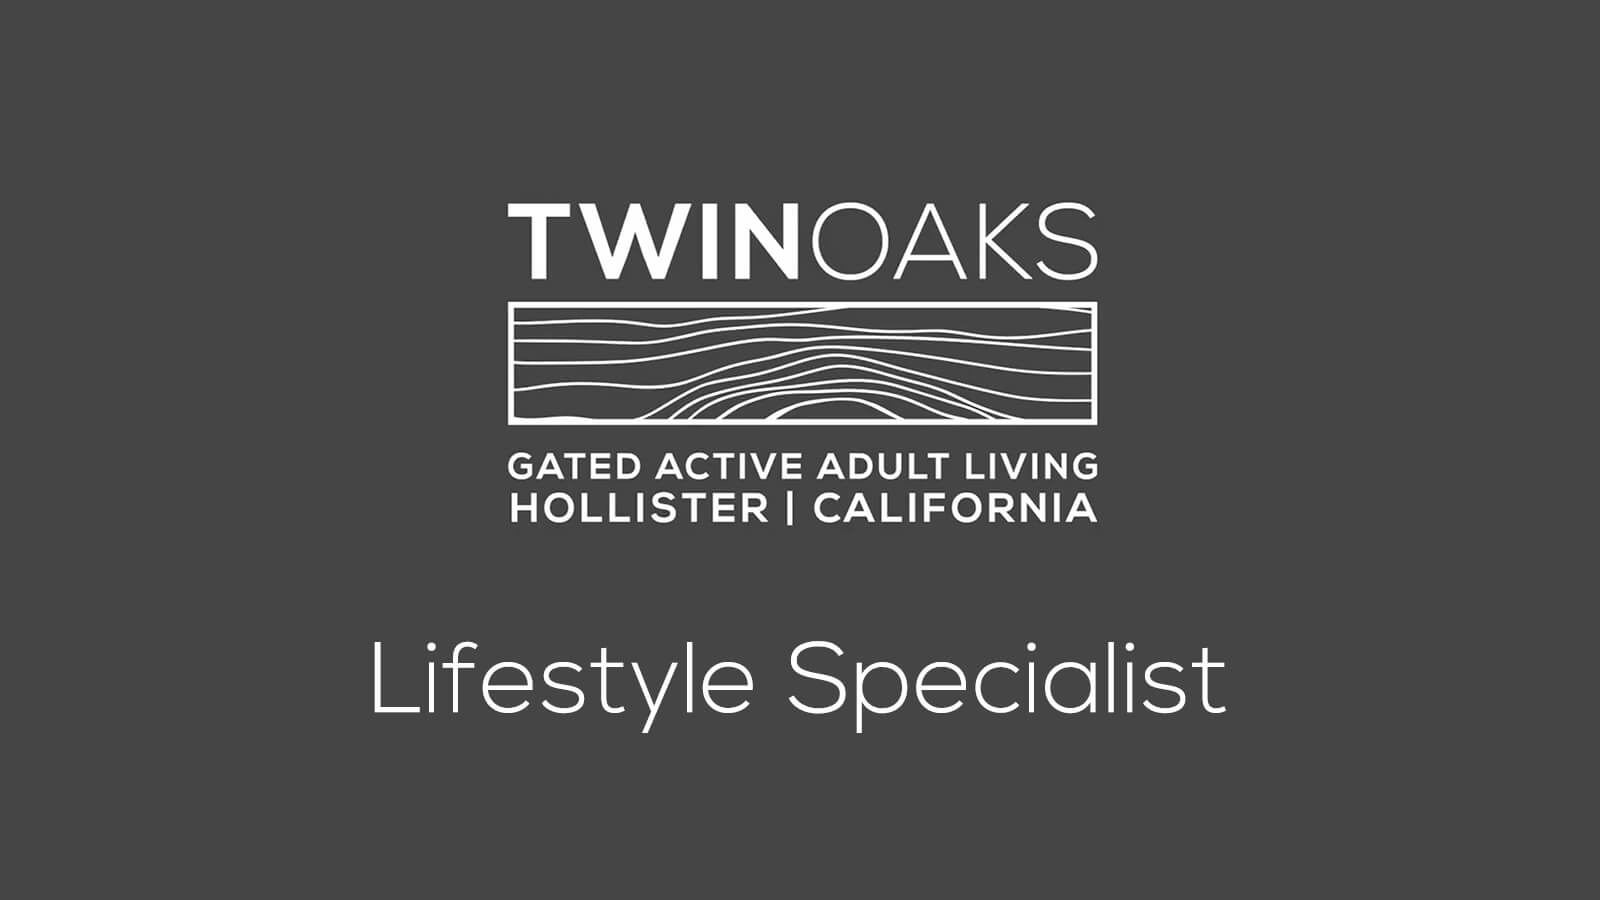 Video: Twin Oaks gated active adult living - Lifestyle Specialist